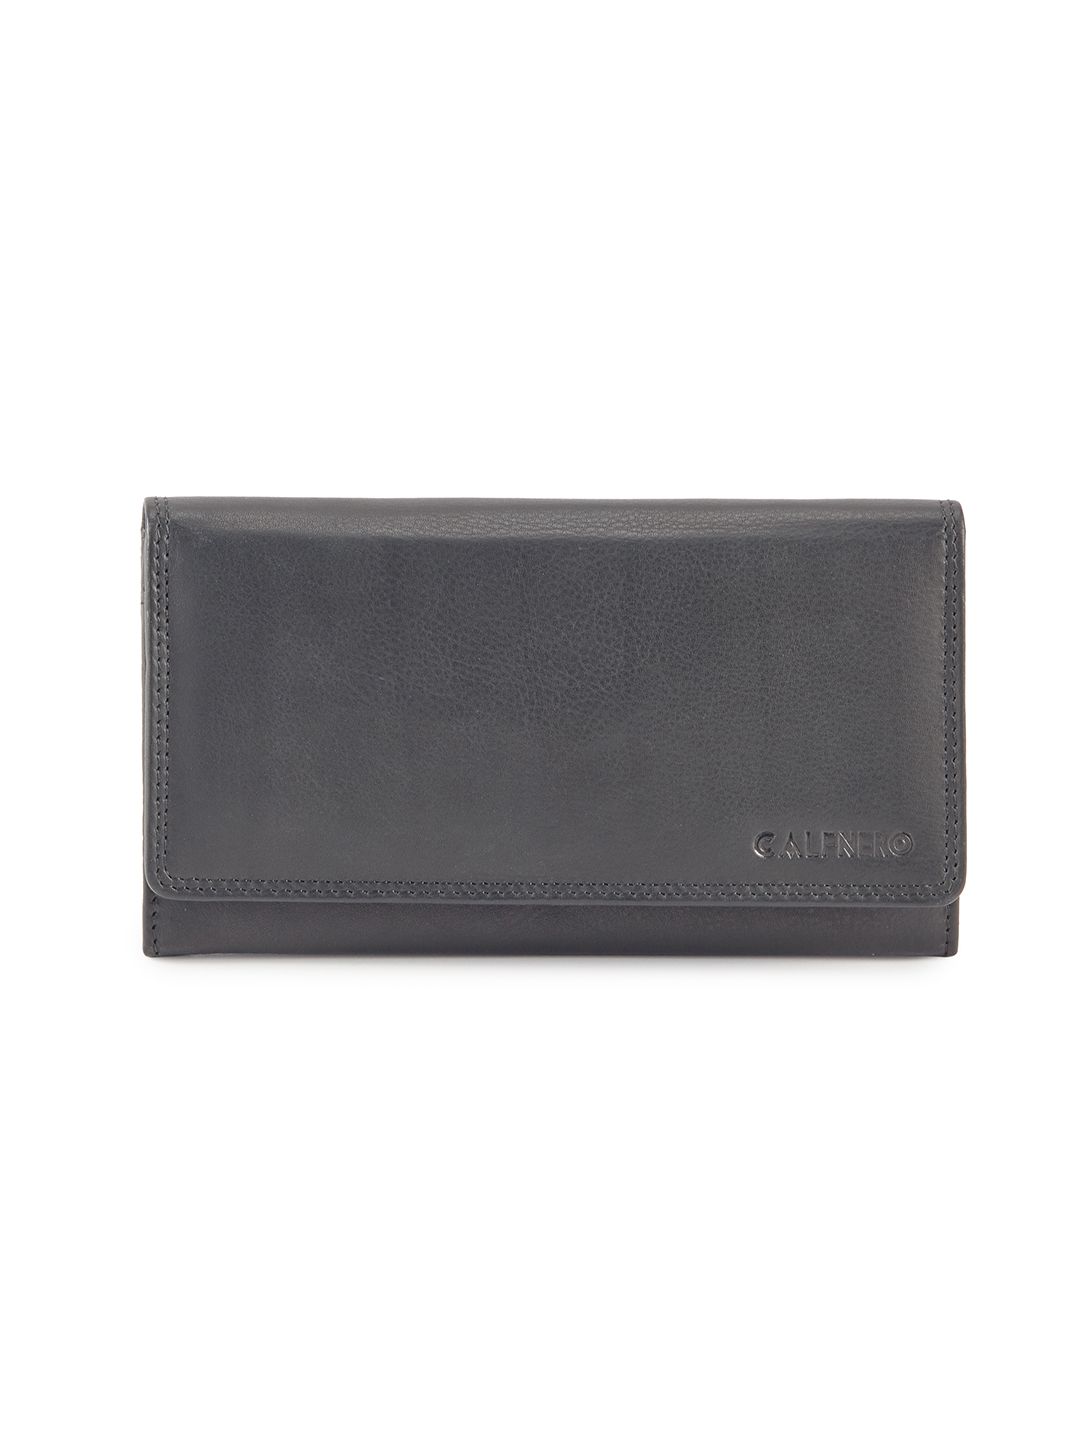 CALFNERO Women Black Solid Two Fold Wallet Price in India